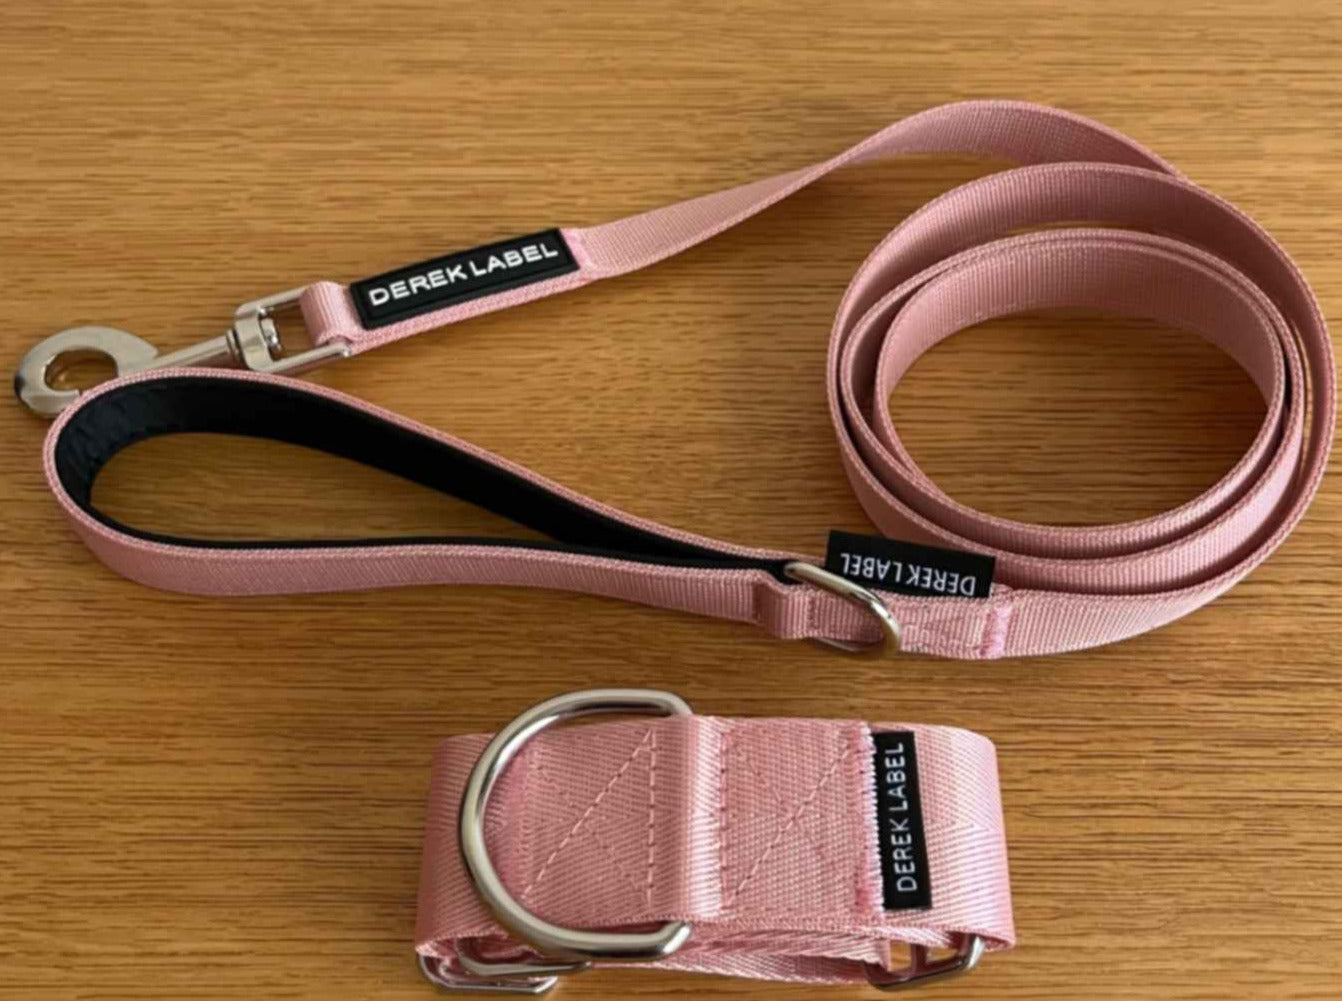 Rose pink colored dog collar and leash